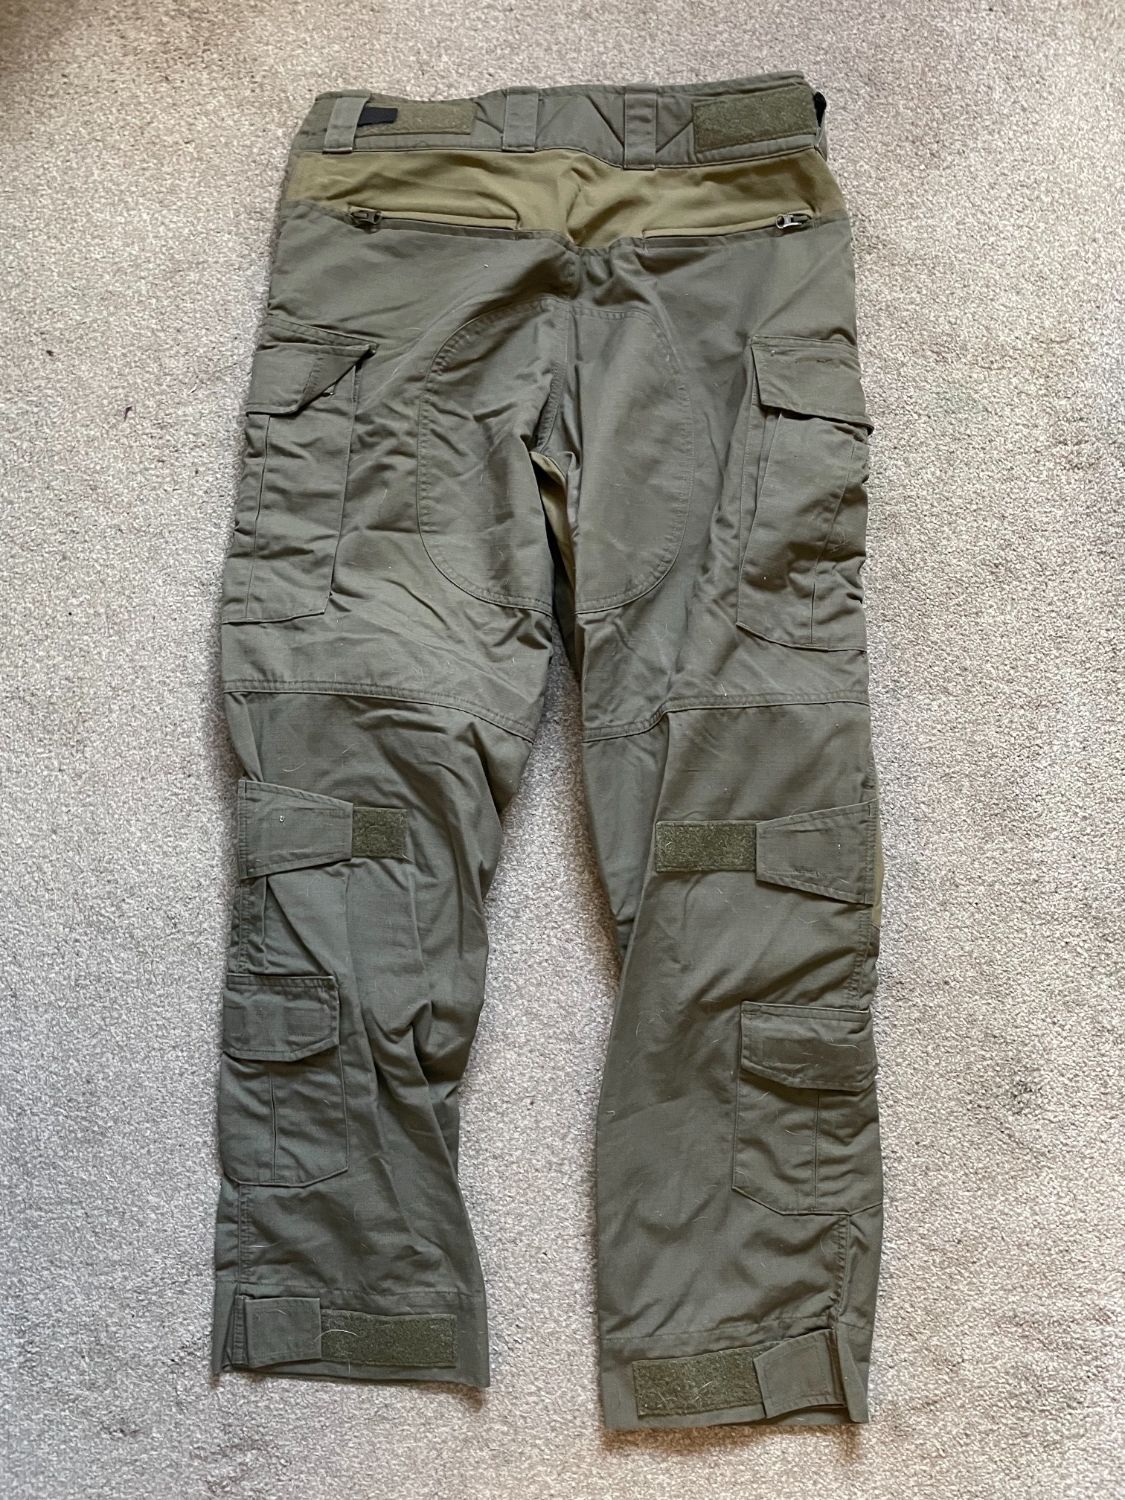 Crye Precision G3 combat trousers 34R ranger green with knee pads ...